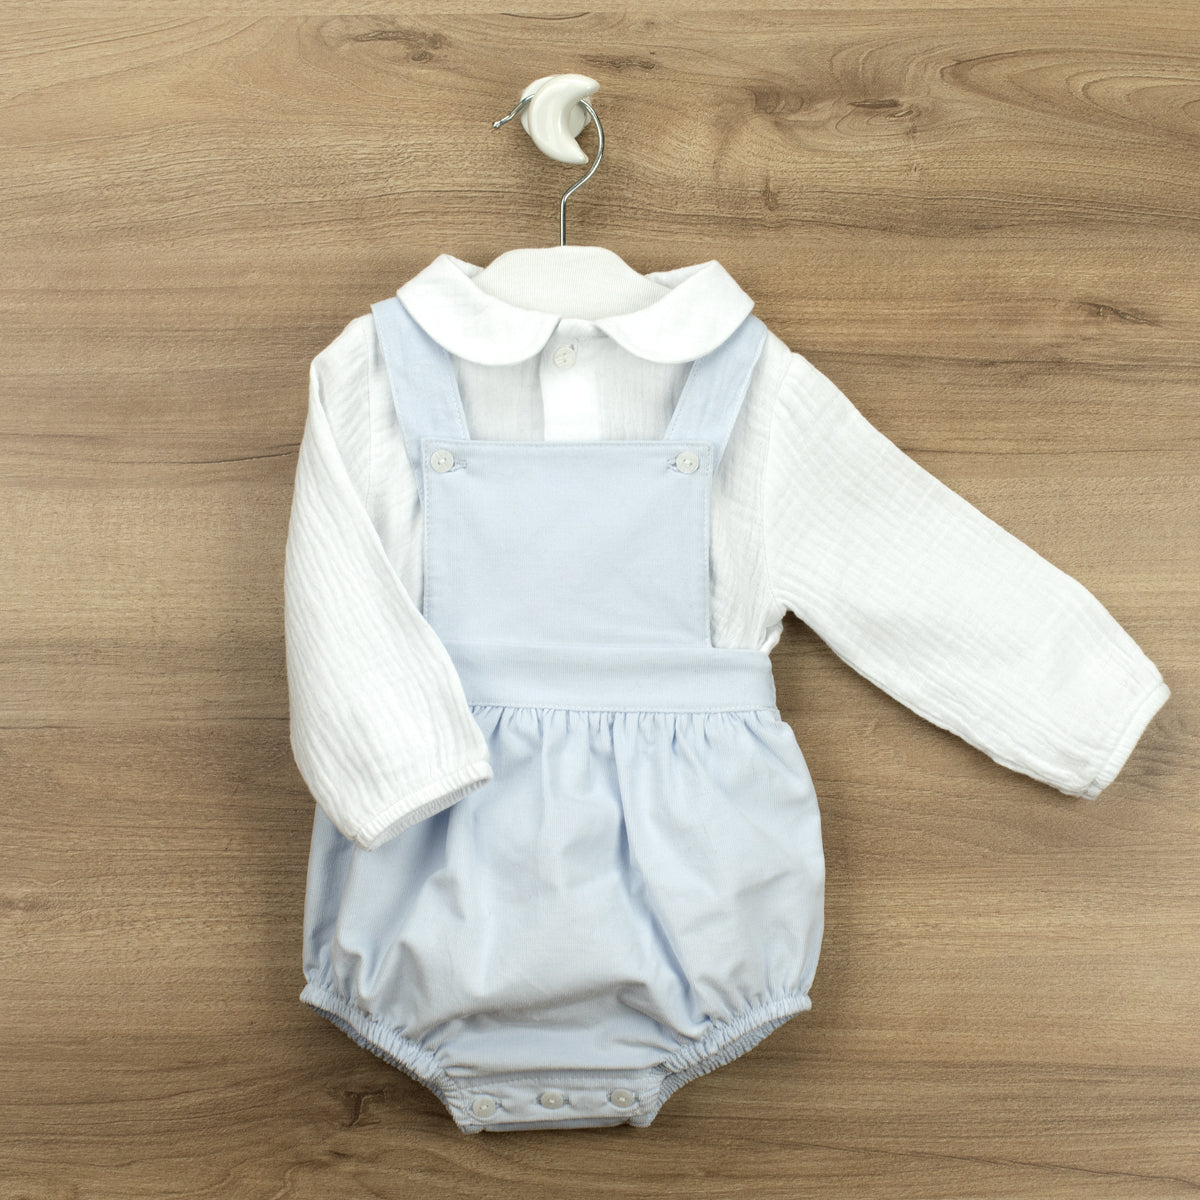 Babidu'S Blue soft and fluffy dungarees made of terry cloth and cotton. Perfect for baby boys age 3-24 months old. 